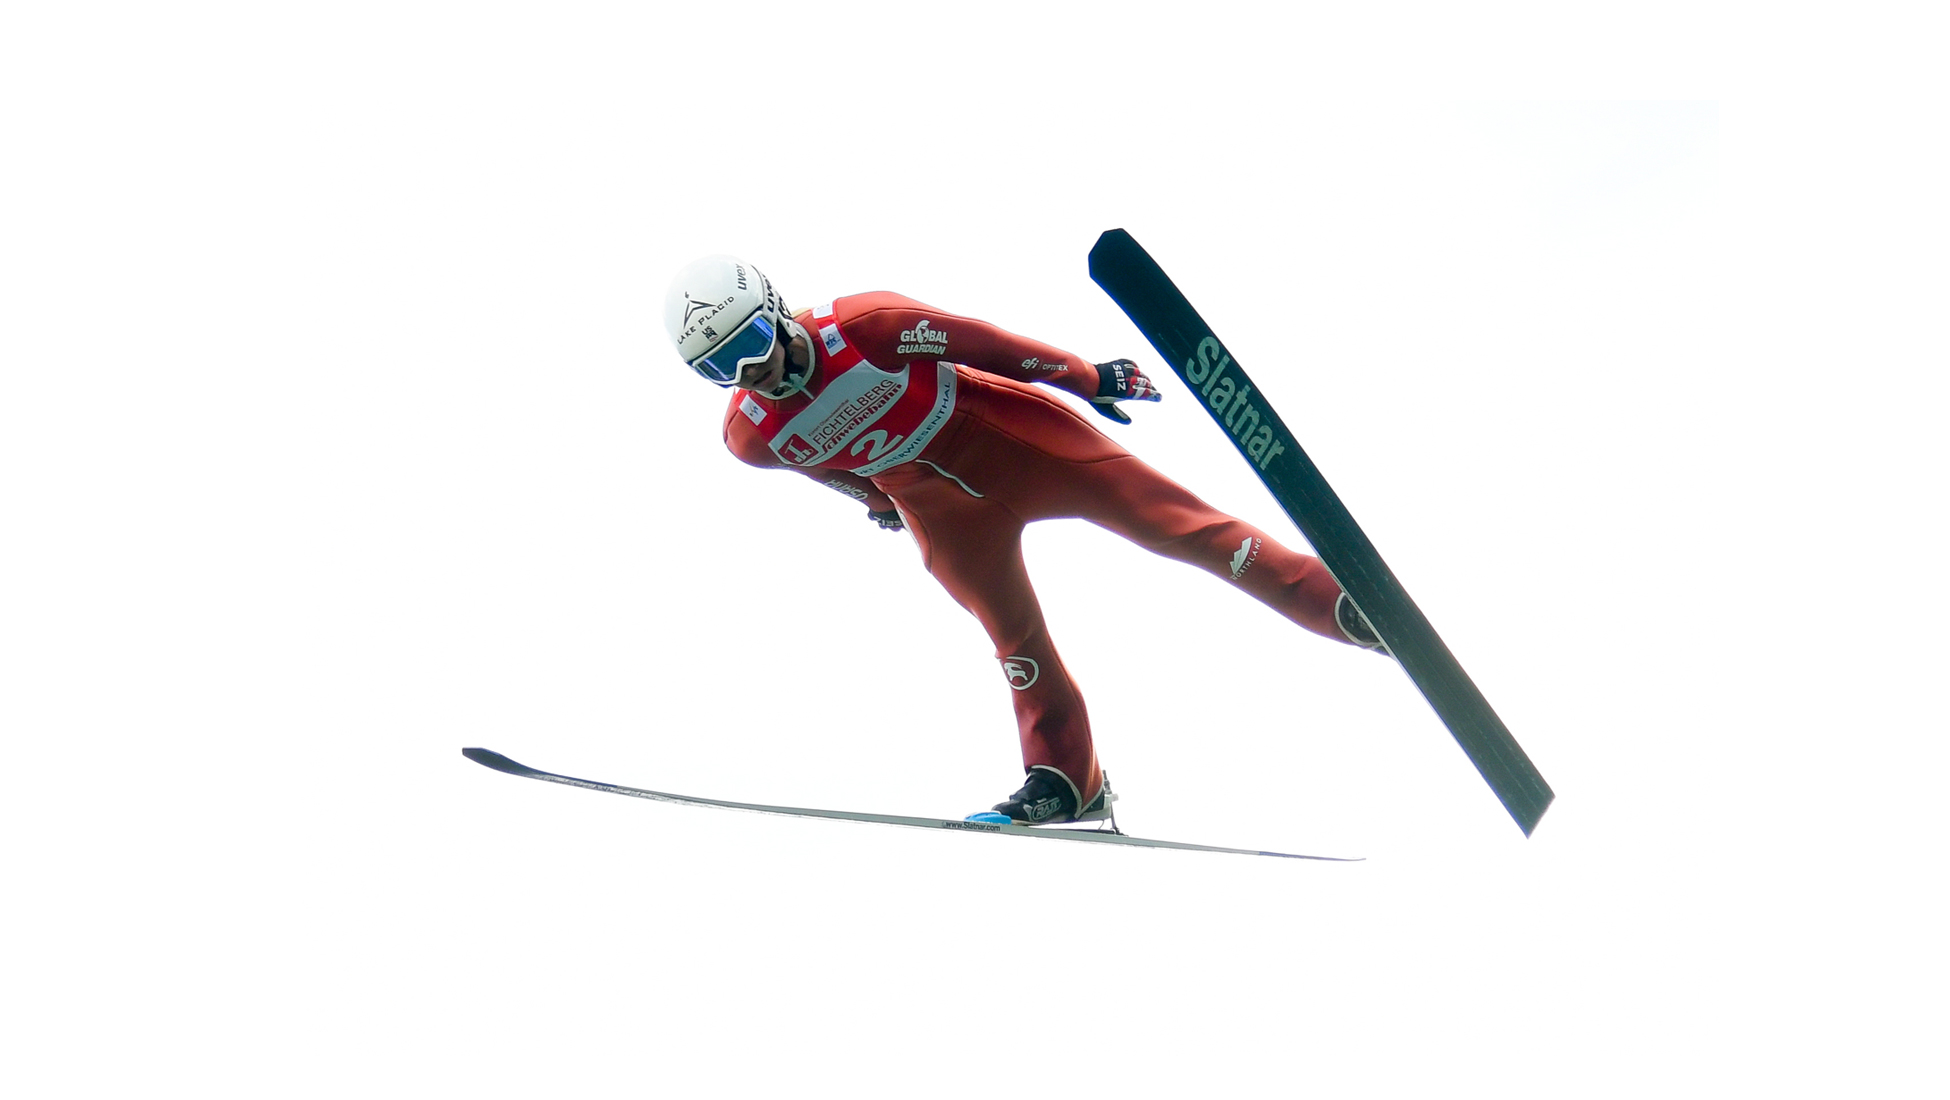 Tara Geraghty-Moats Second in Nordic Combined